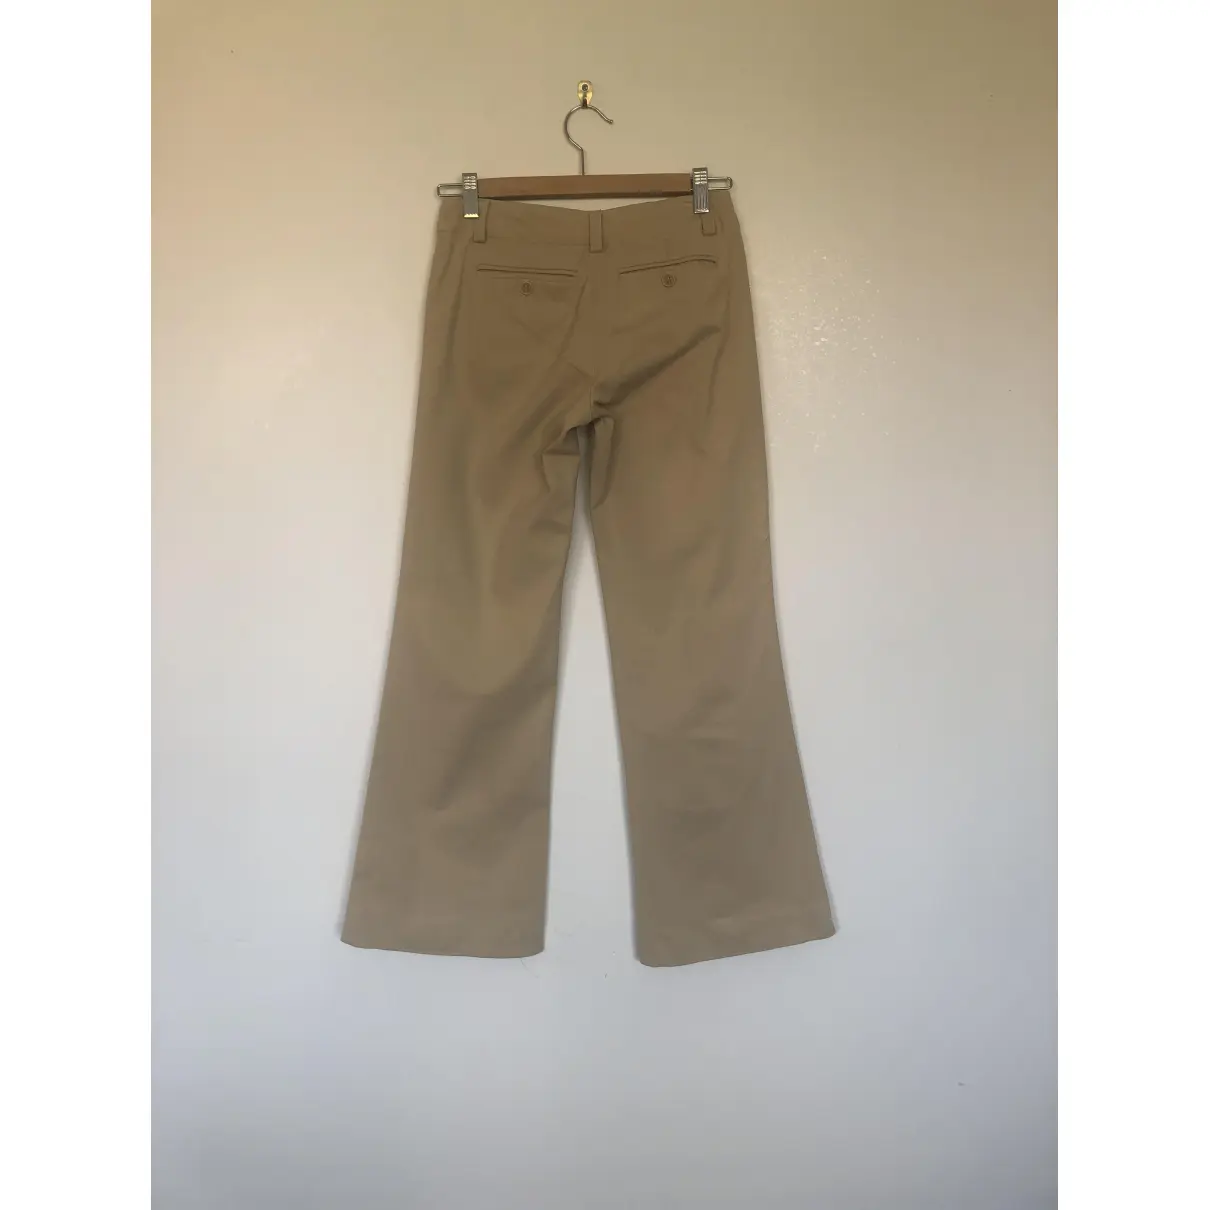 Buy Theory Chino pants online